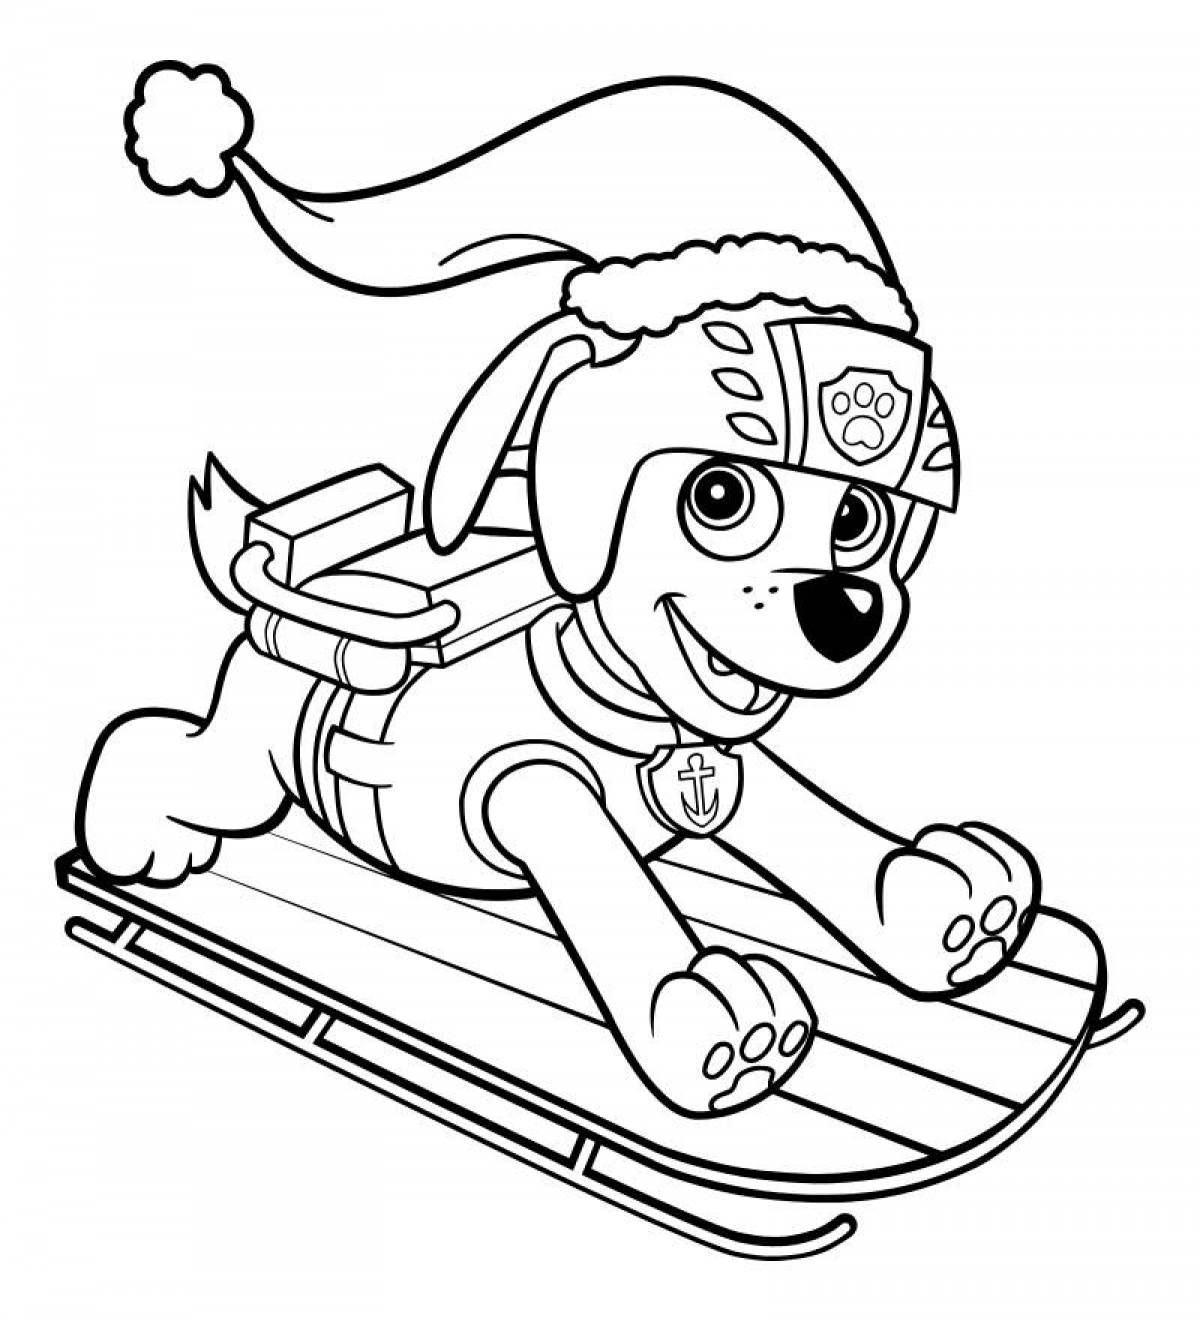 Fabulous Paw Patrol coloring book for 6-7 year olds